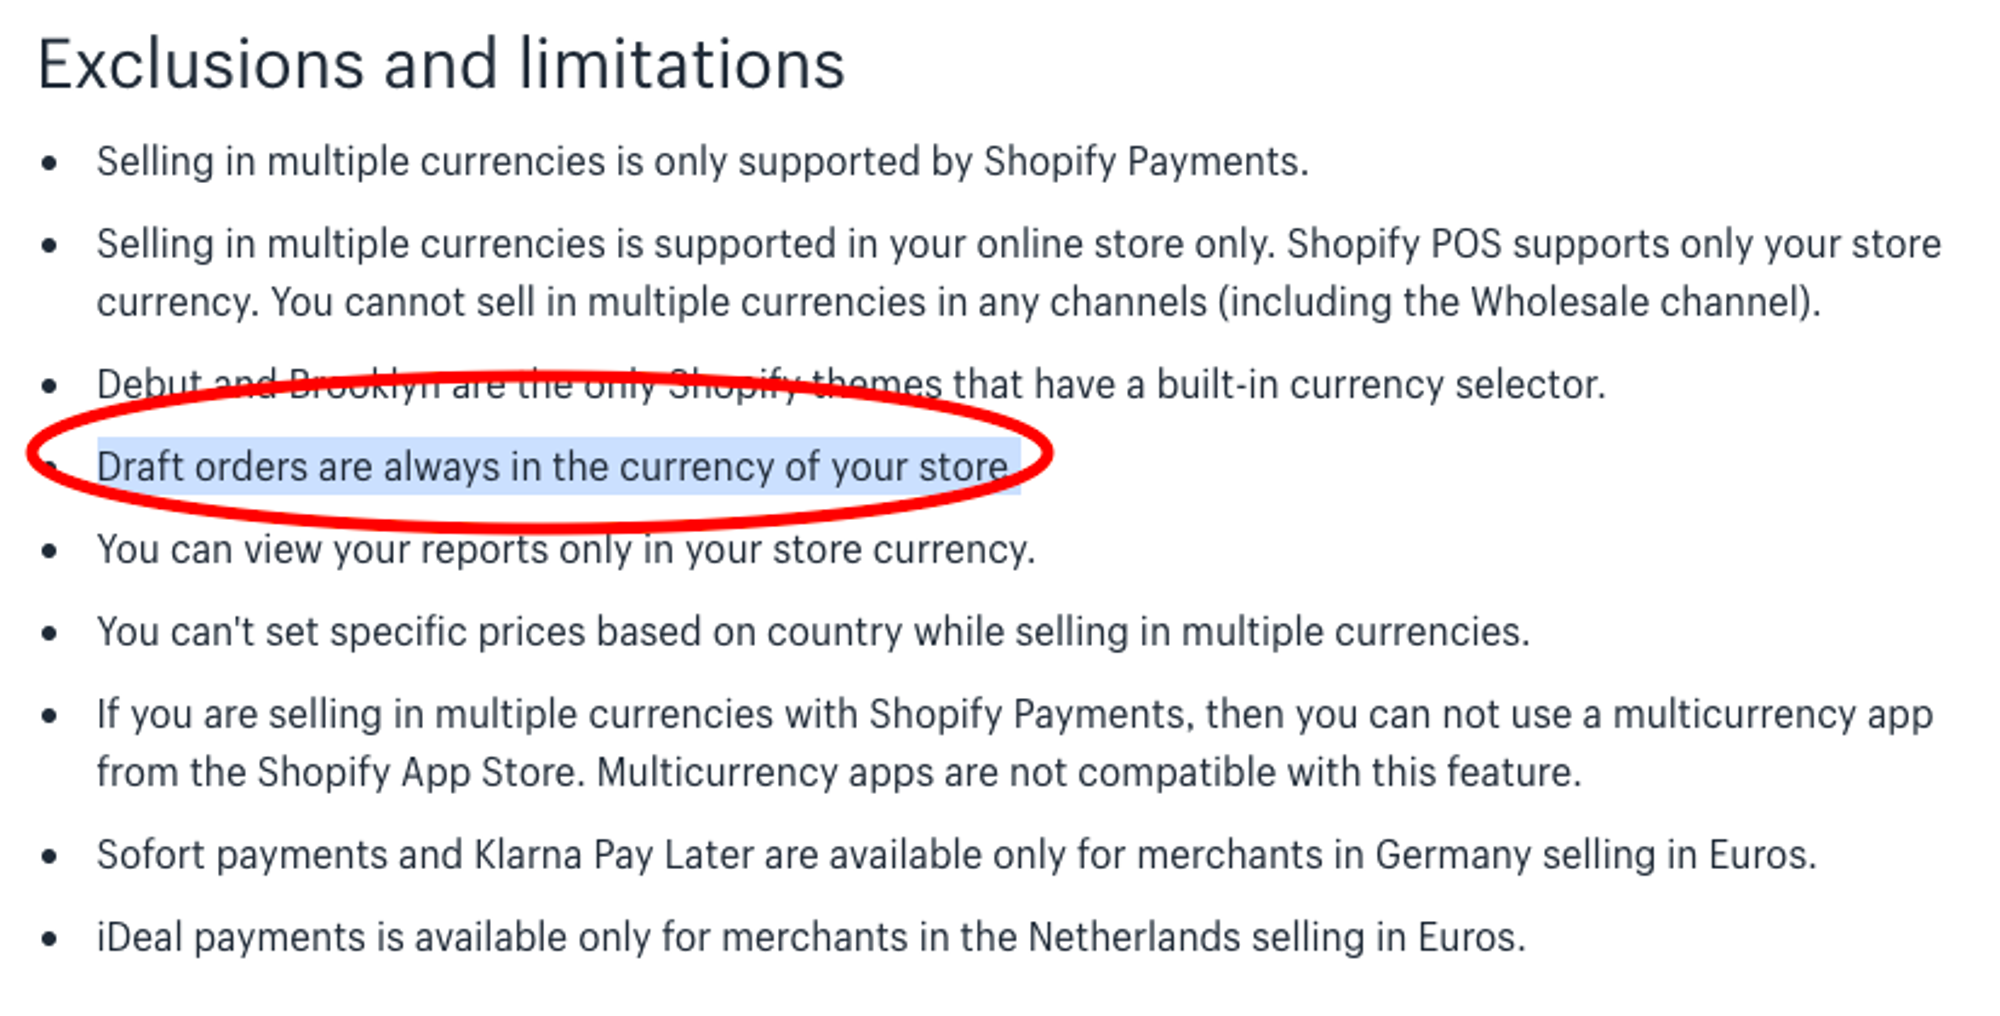 Shopify Official documentation on limitations of draft order